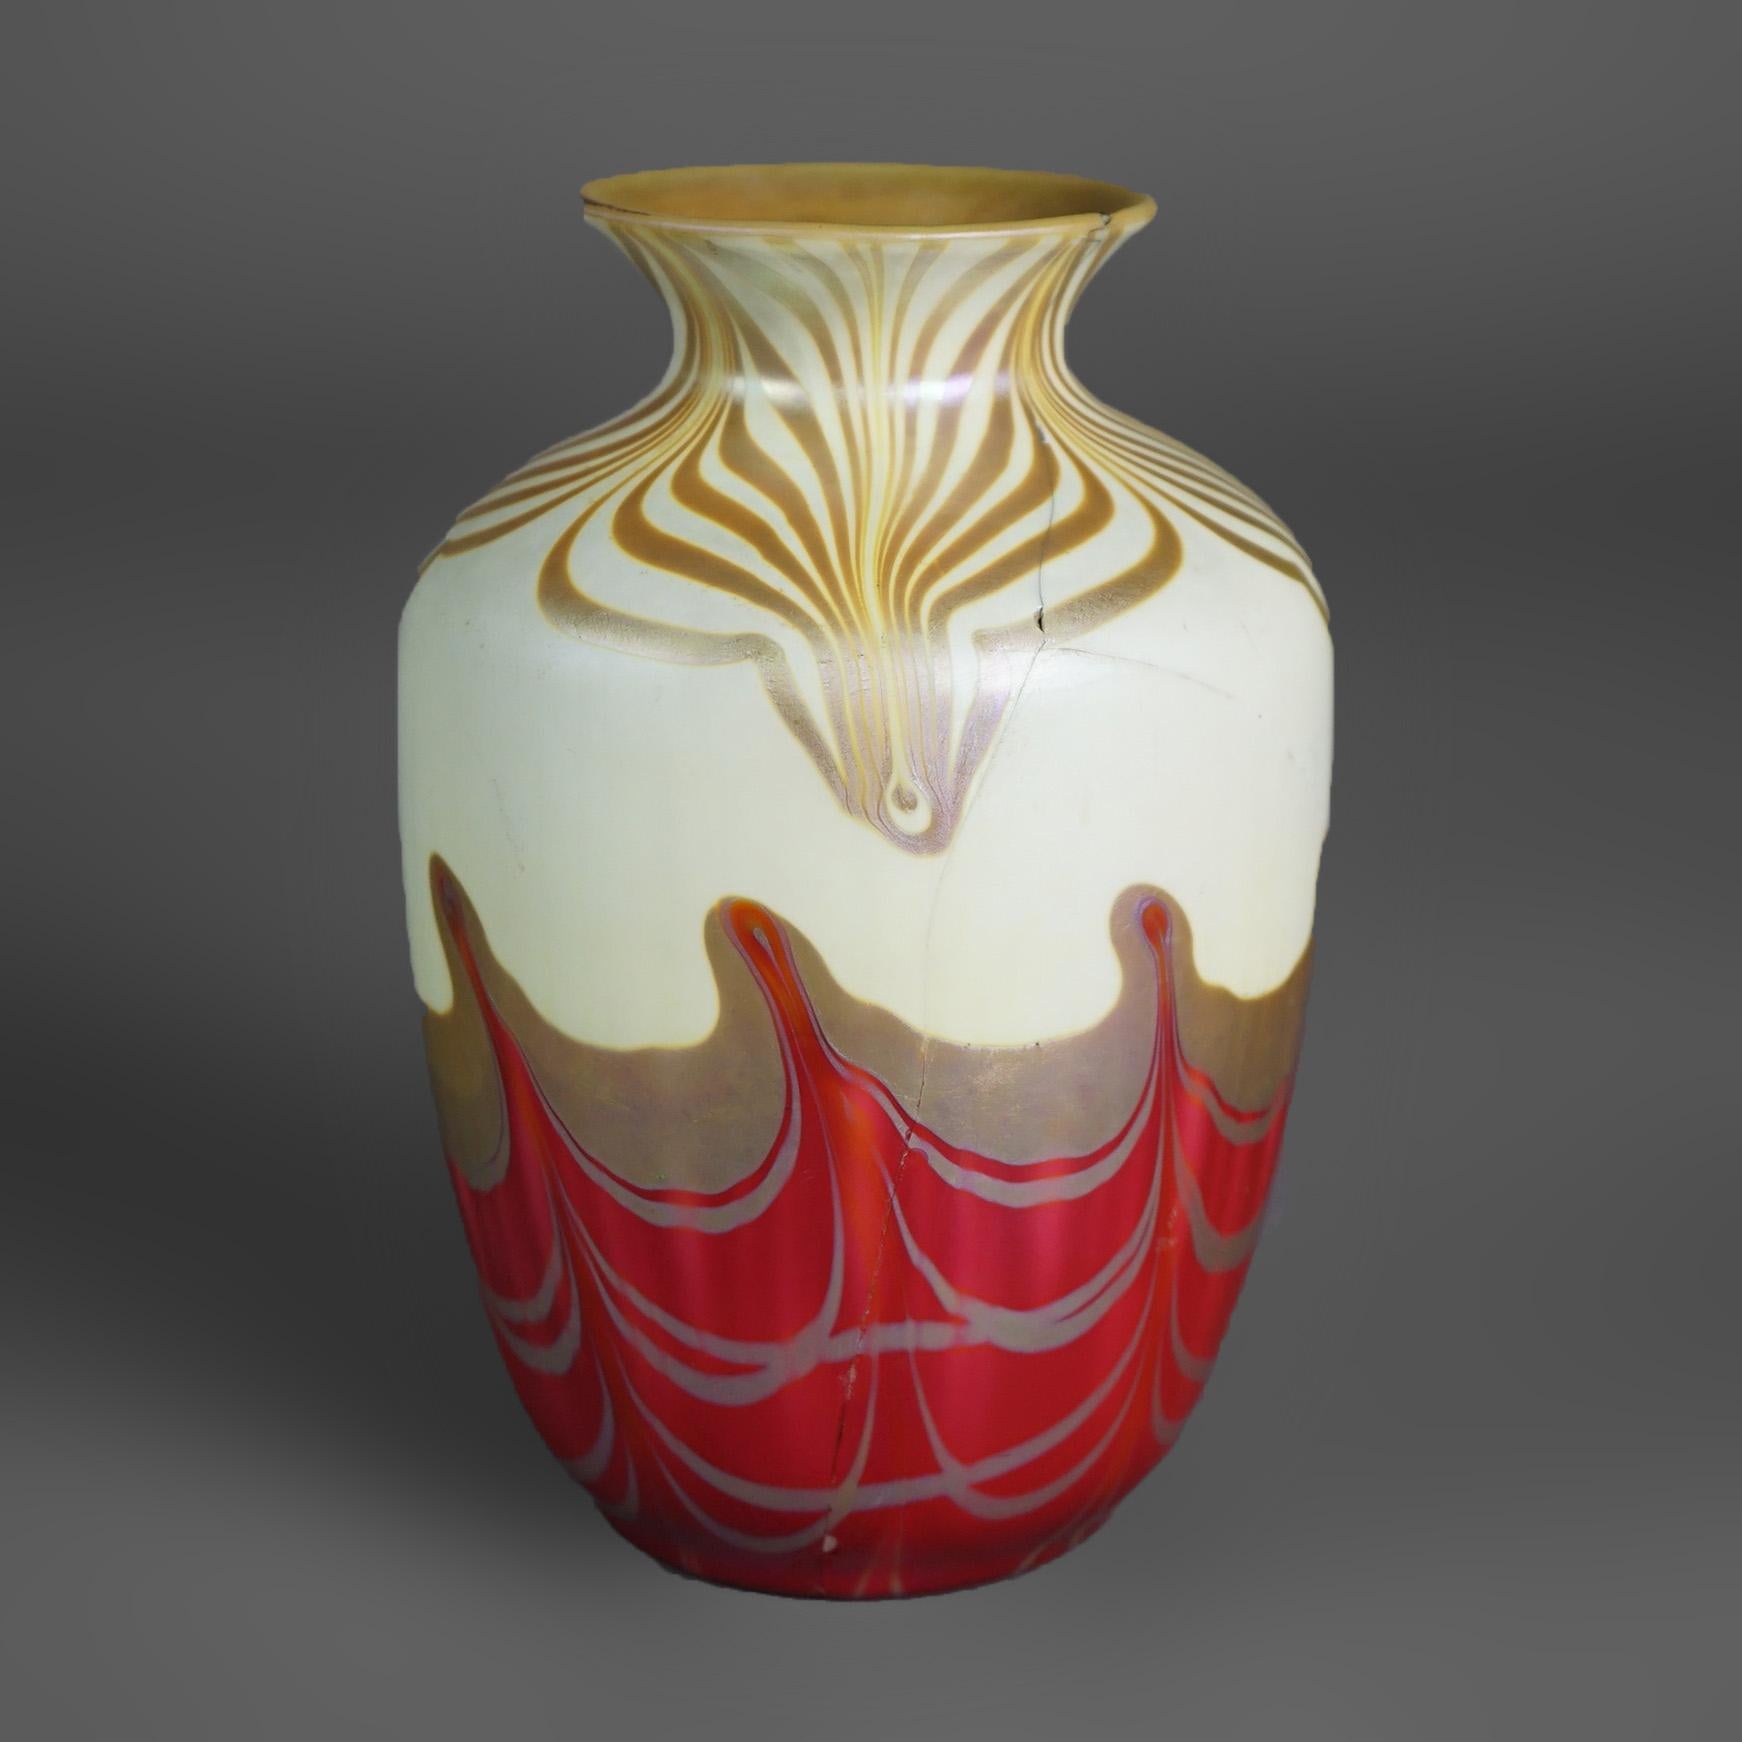 Rare Color Art Glass Vase in the Manner of Steuben, Stylized Pulled Feather, Circa 1920 (repairs and spider crack as photographed).

Measures - 7 1/4